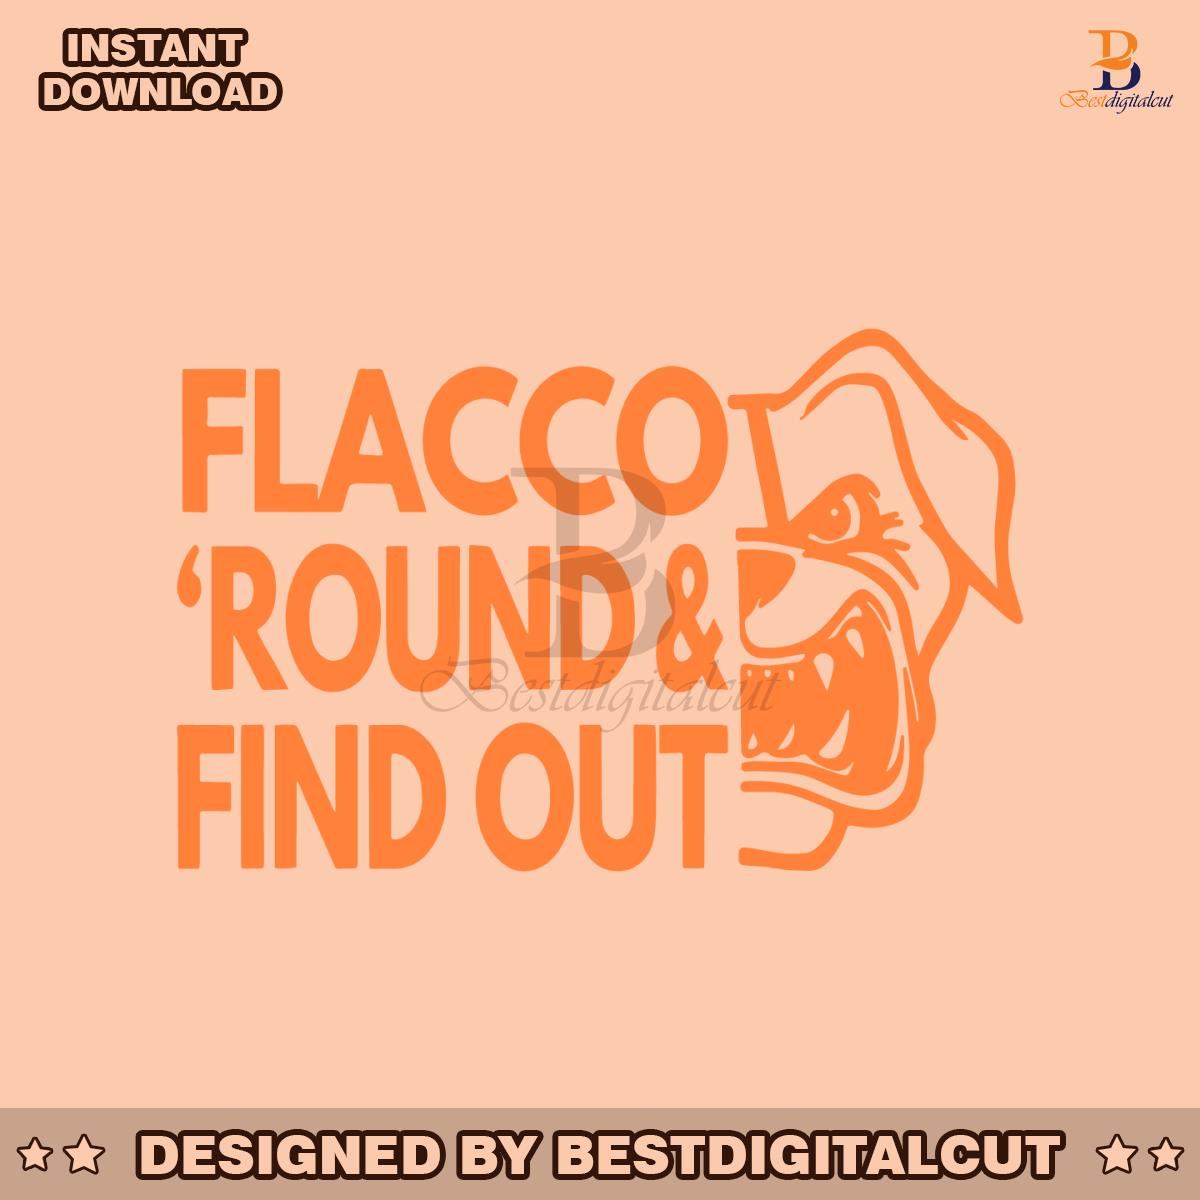 flacco-round-and-find-out-cleveland-svg